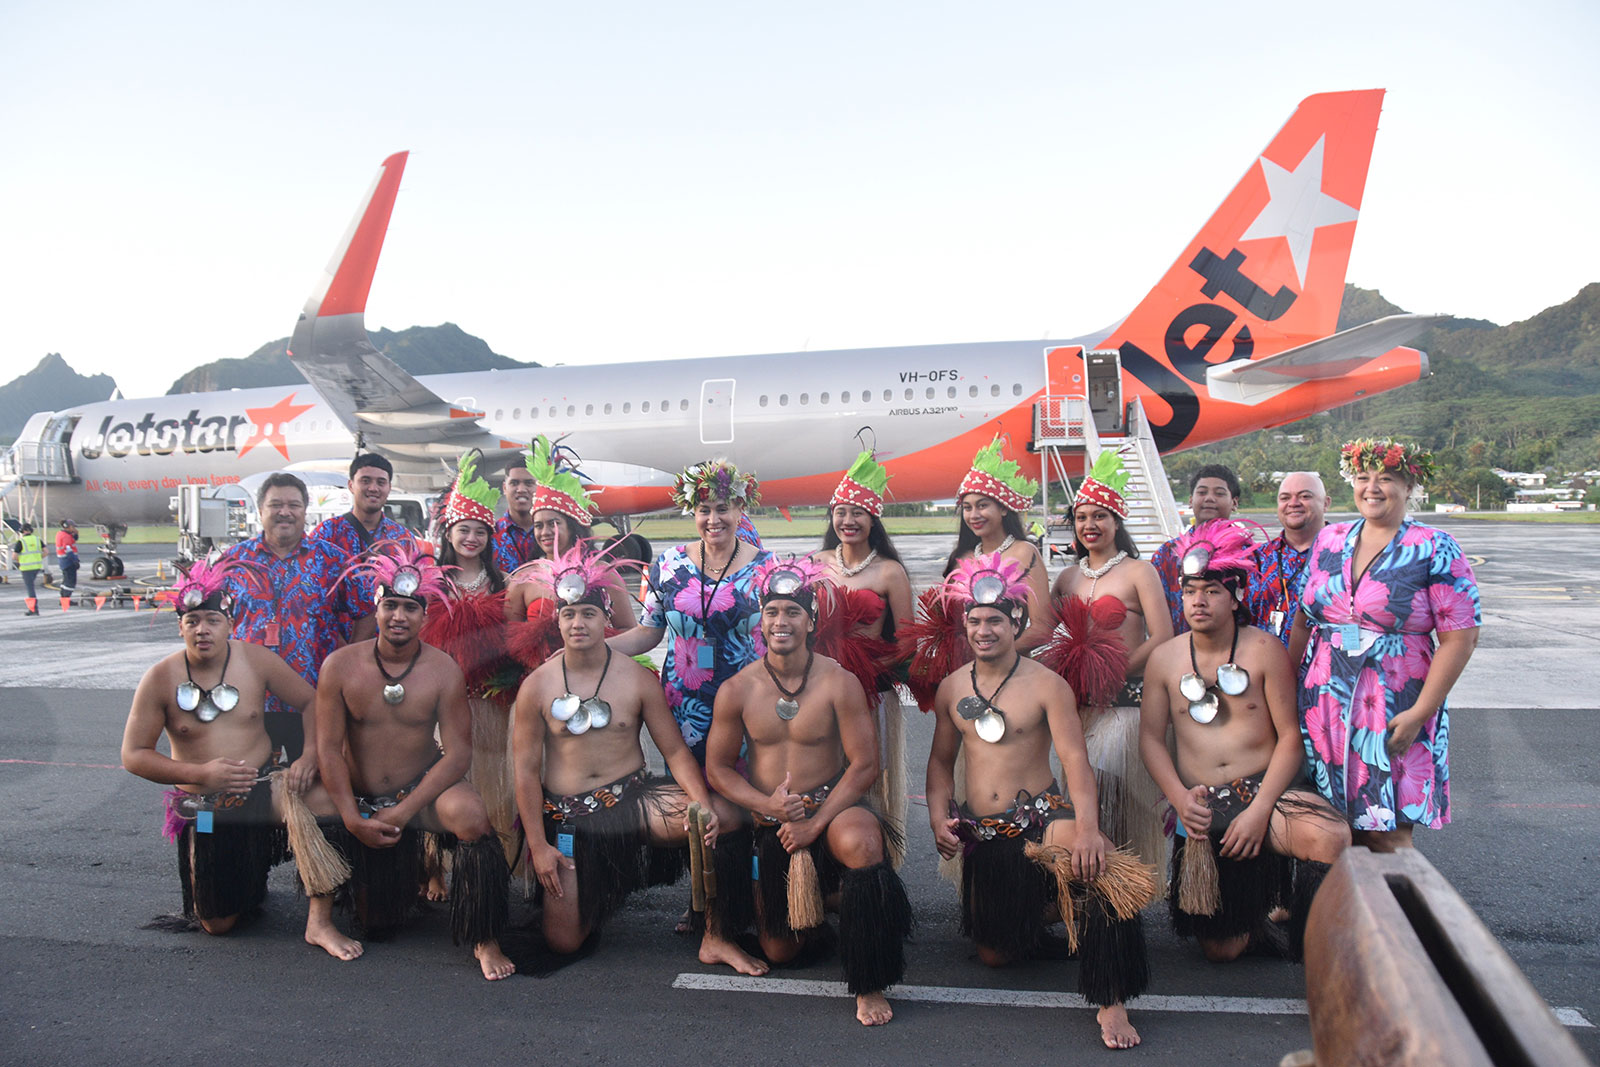 Inaugural Jetstar Sydney flight arrives to a warm welcome